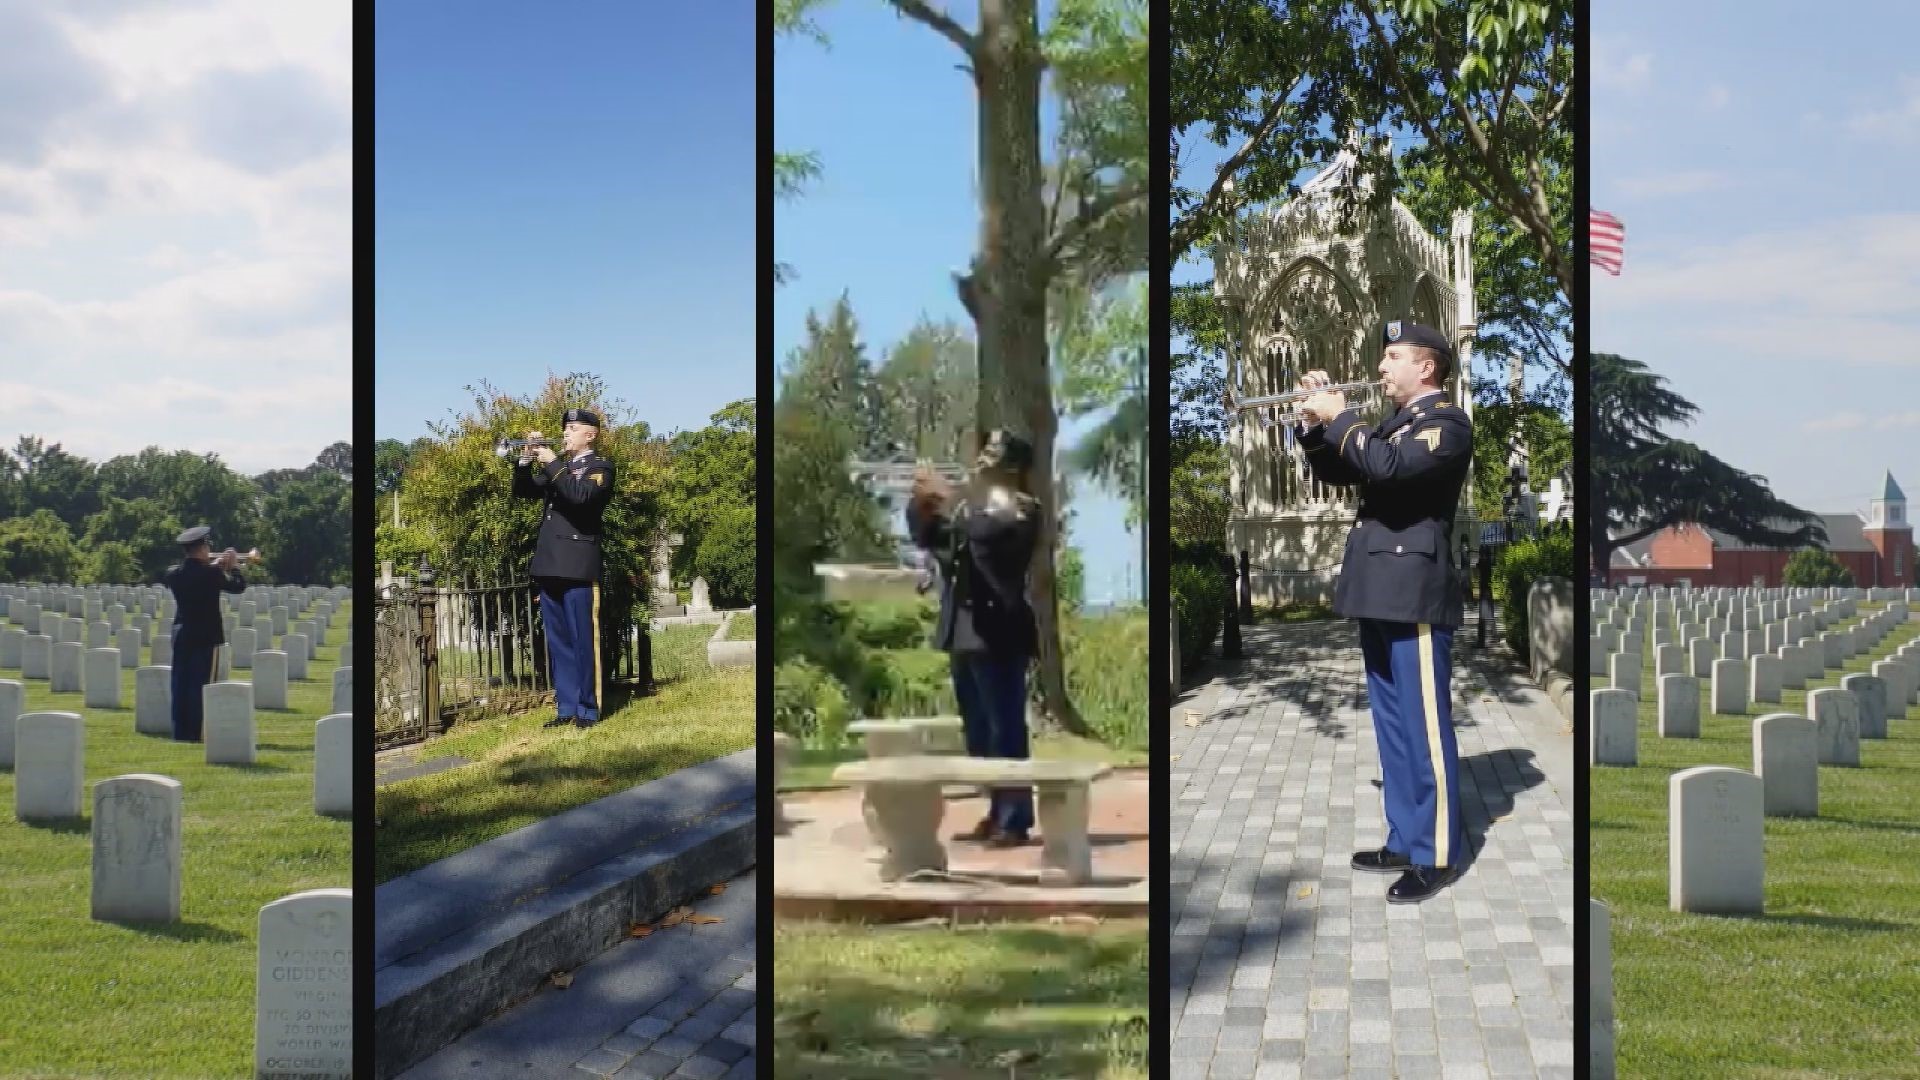 Several musicians in the US Army Training and Doctrine Command band worked together on a touching tribute for Memorial Day.